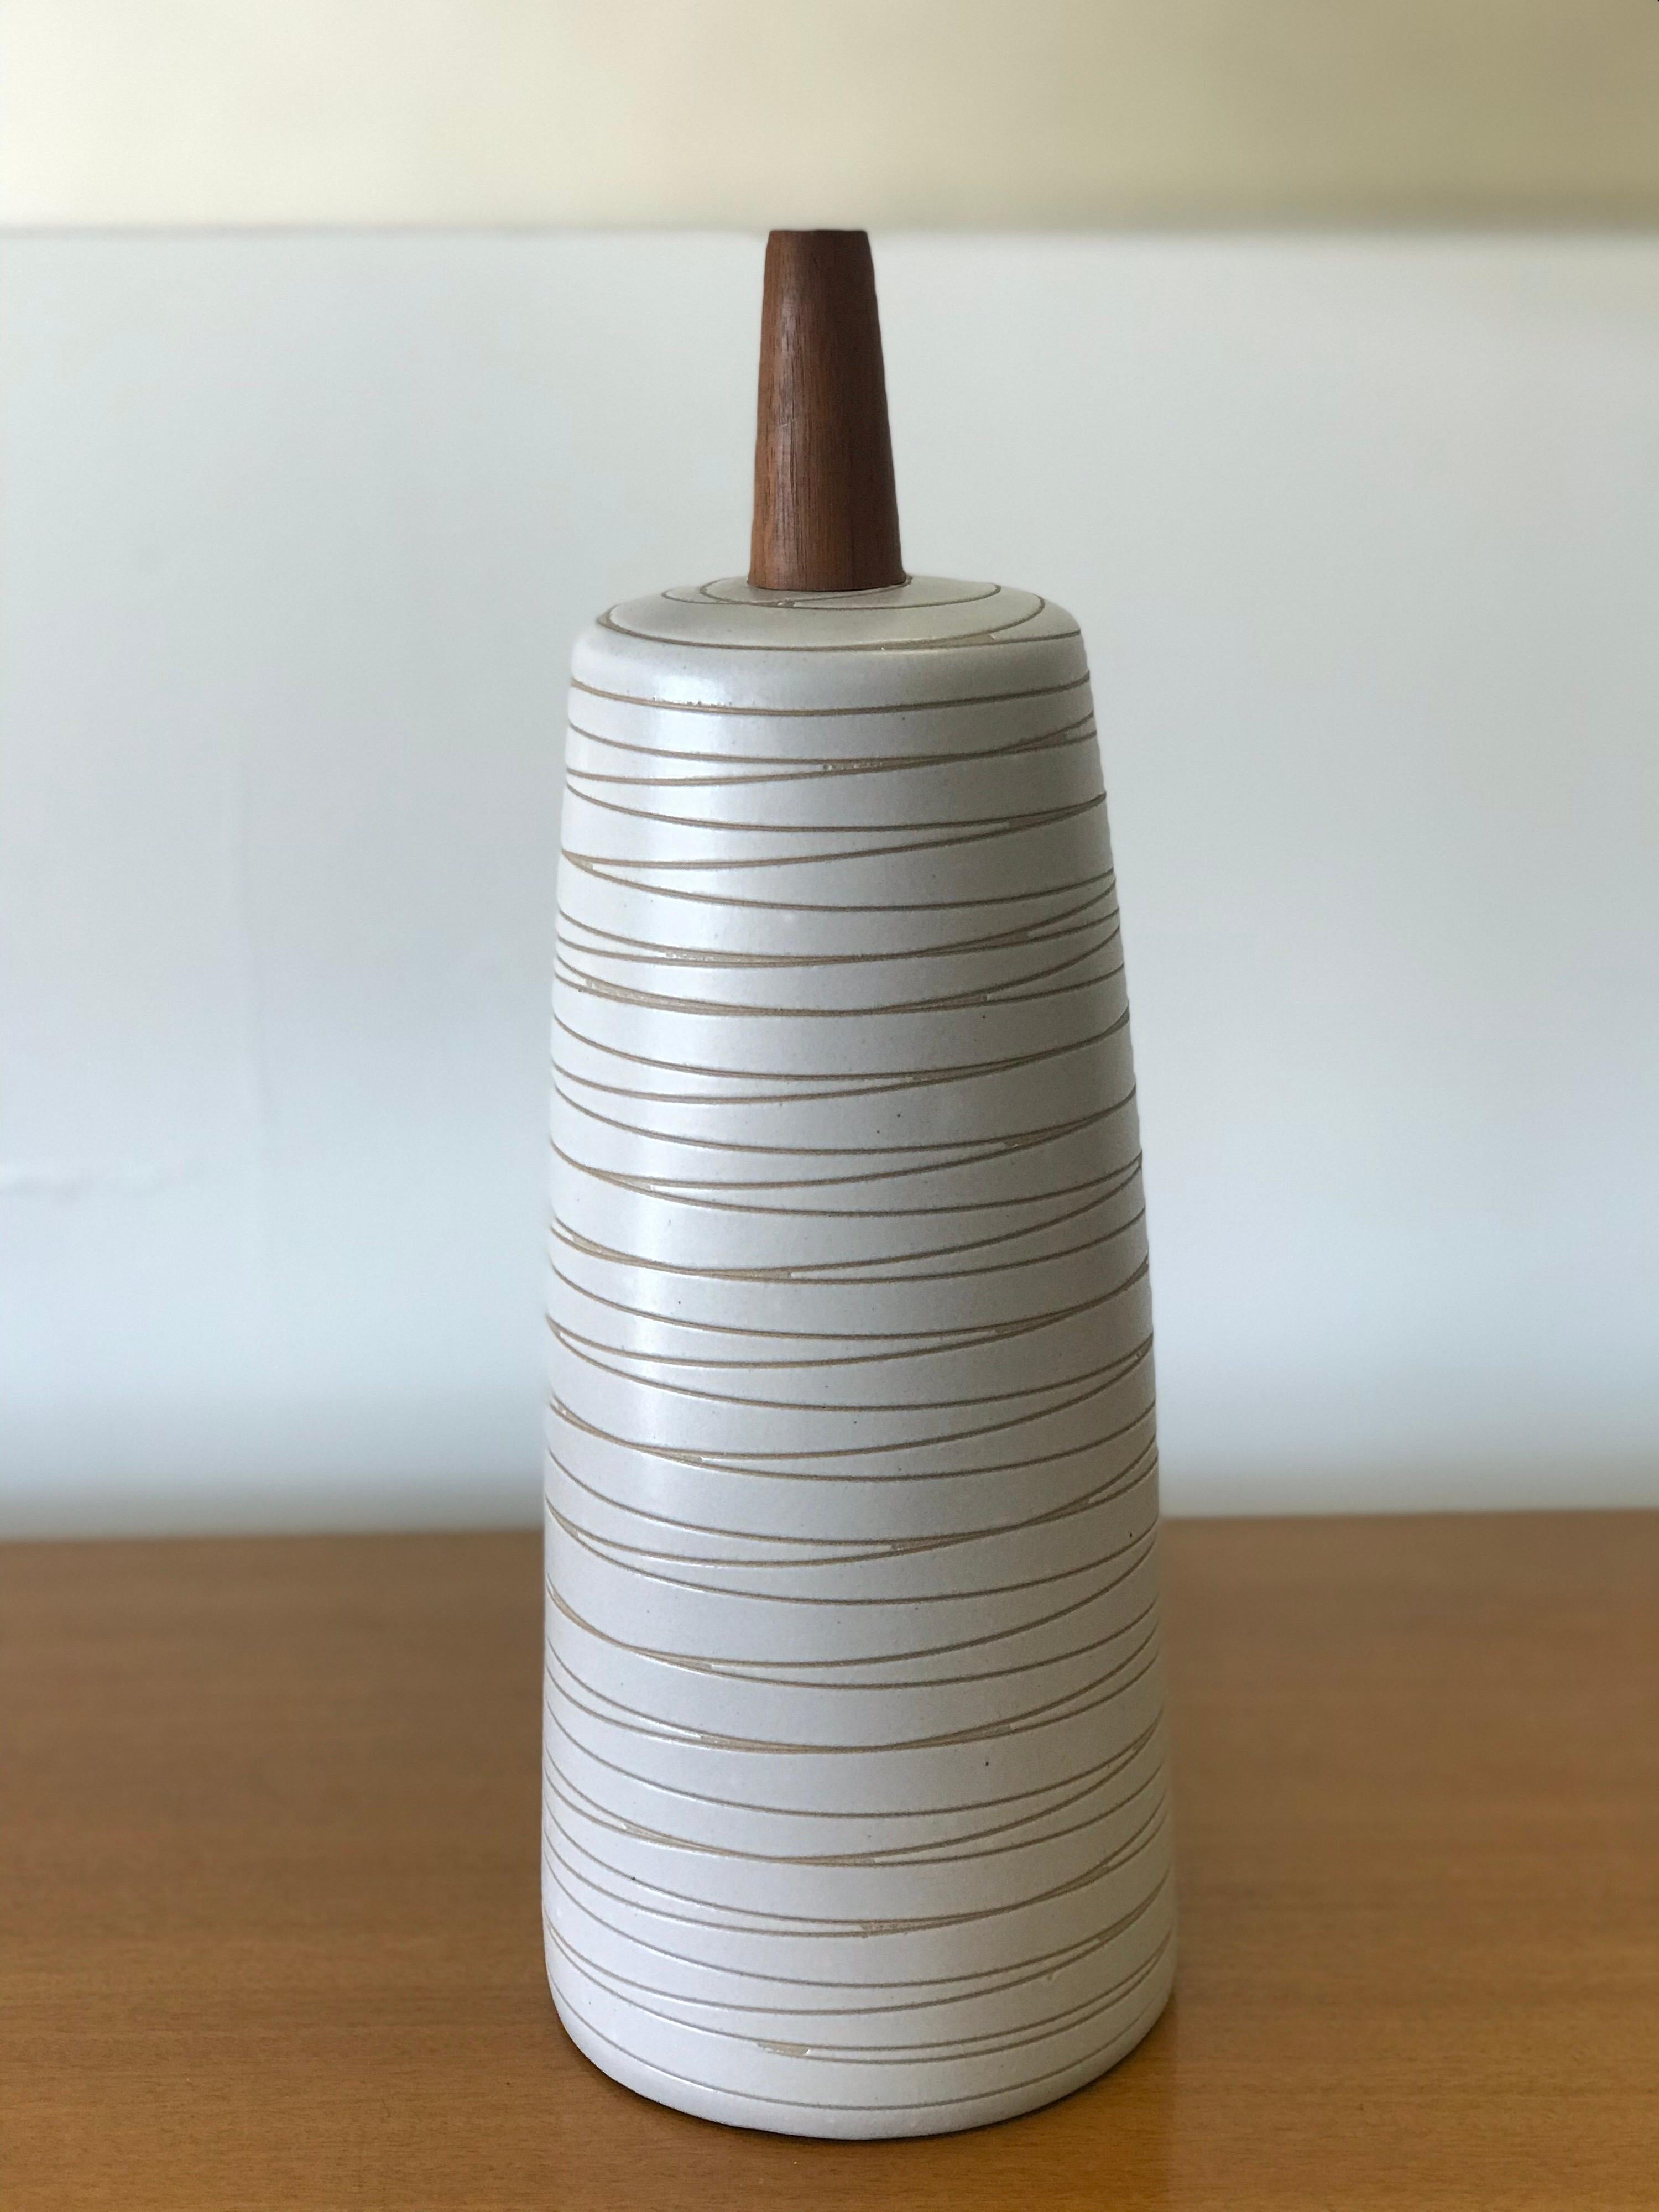 Table lamp by ceramicist duo Jane and Gordon Martz for Marshall Studios. Flat white glaze with incised spiral detail. 

Measures: Overall
25” tall
15” wide

Ceramic portion:
11” tall
5